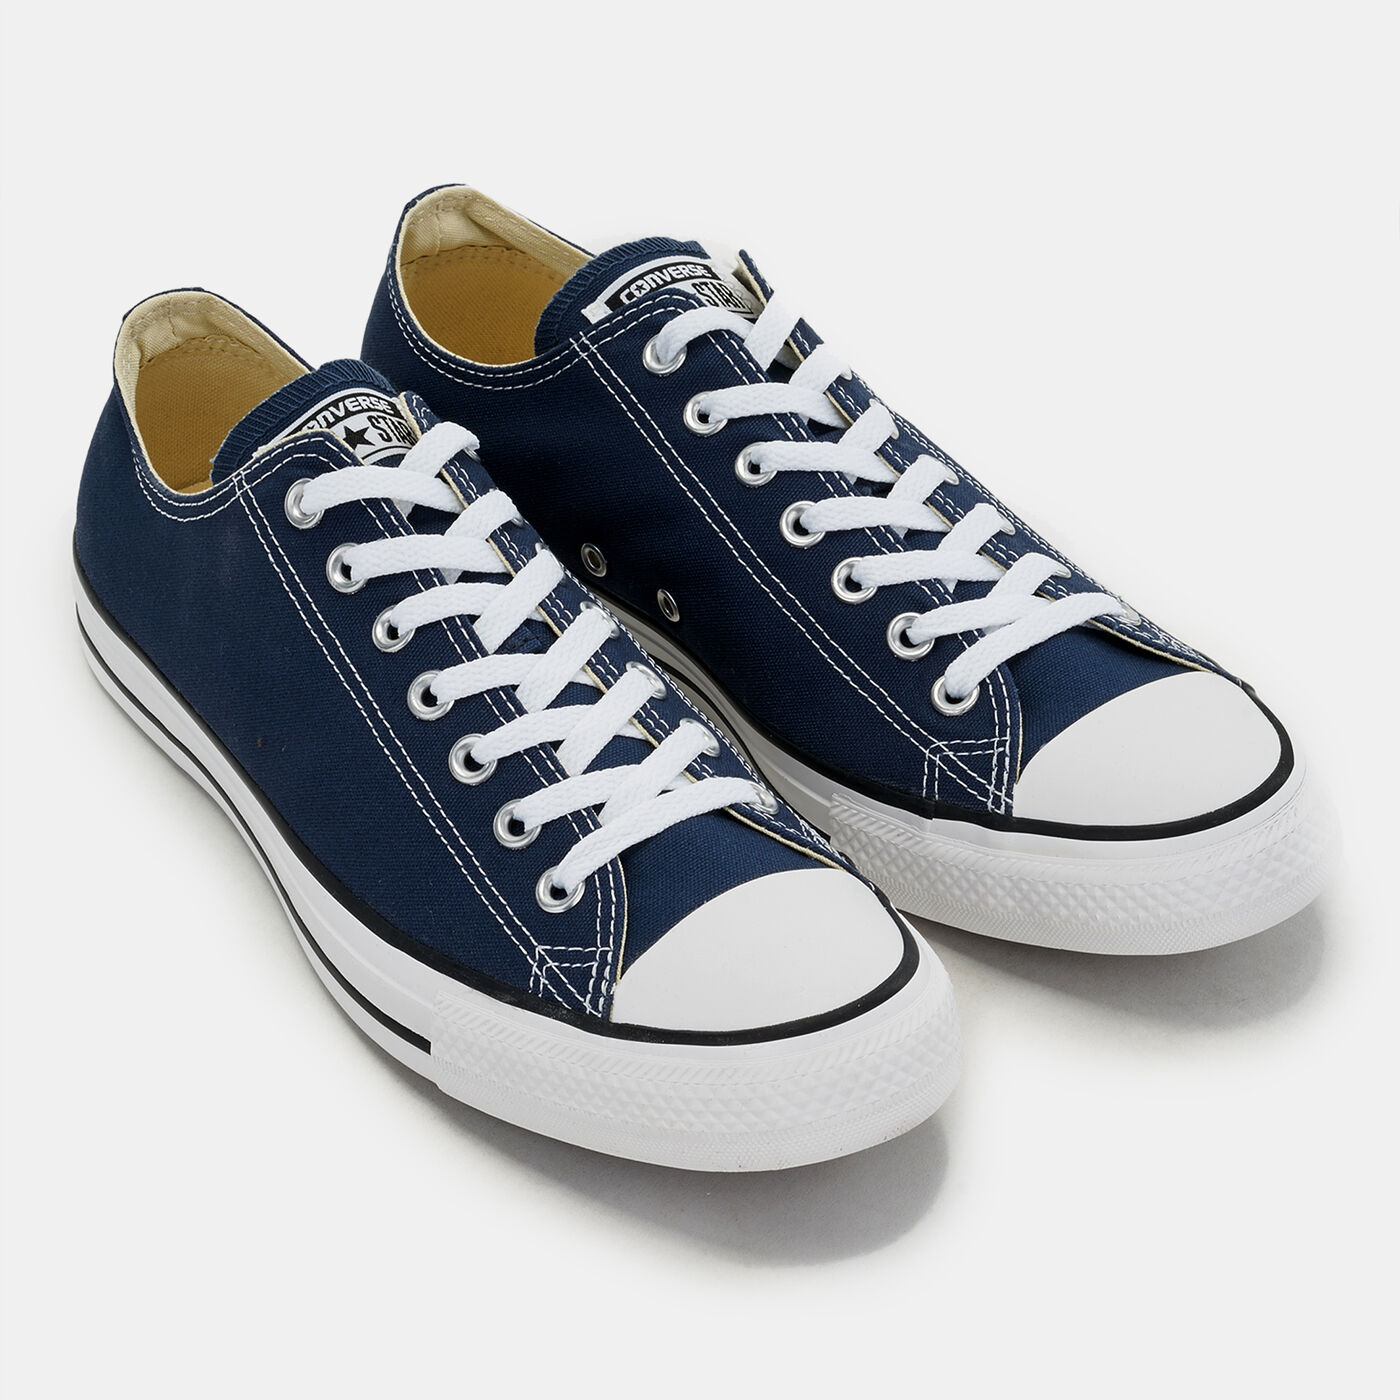 Chuck Taylor All Star II Low-Top Unisex Shoe